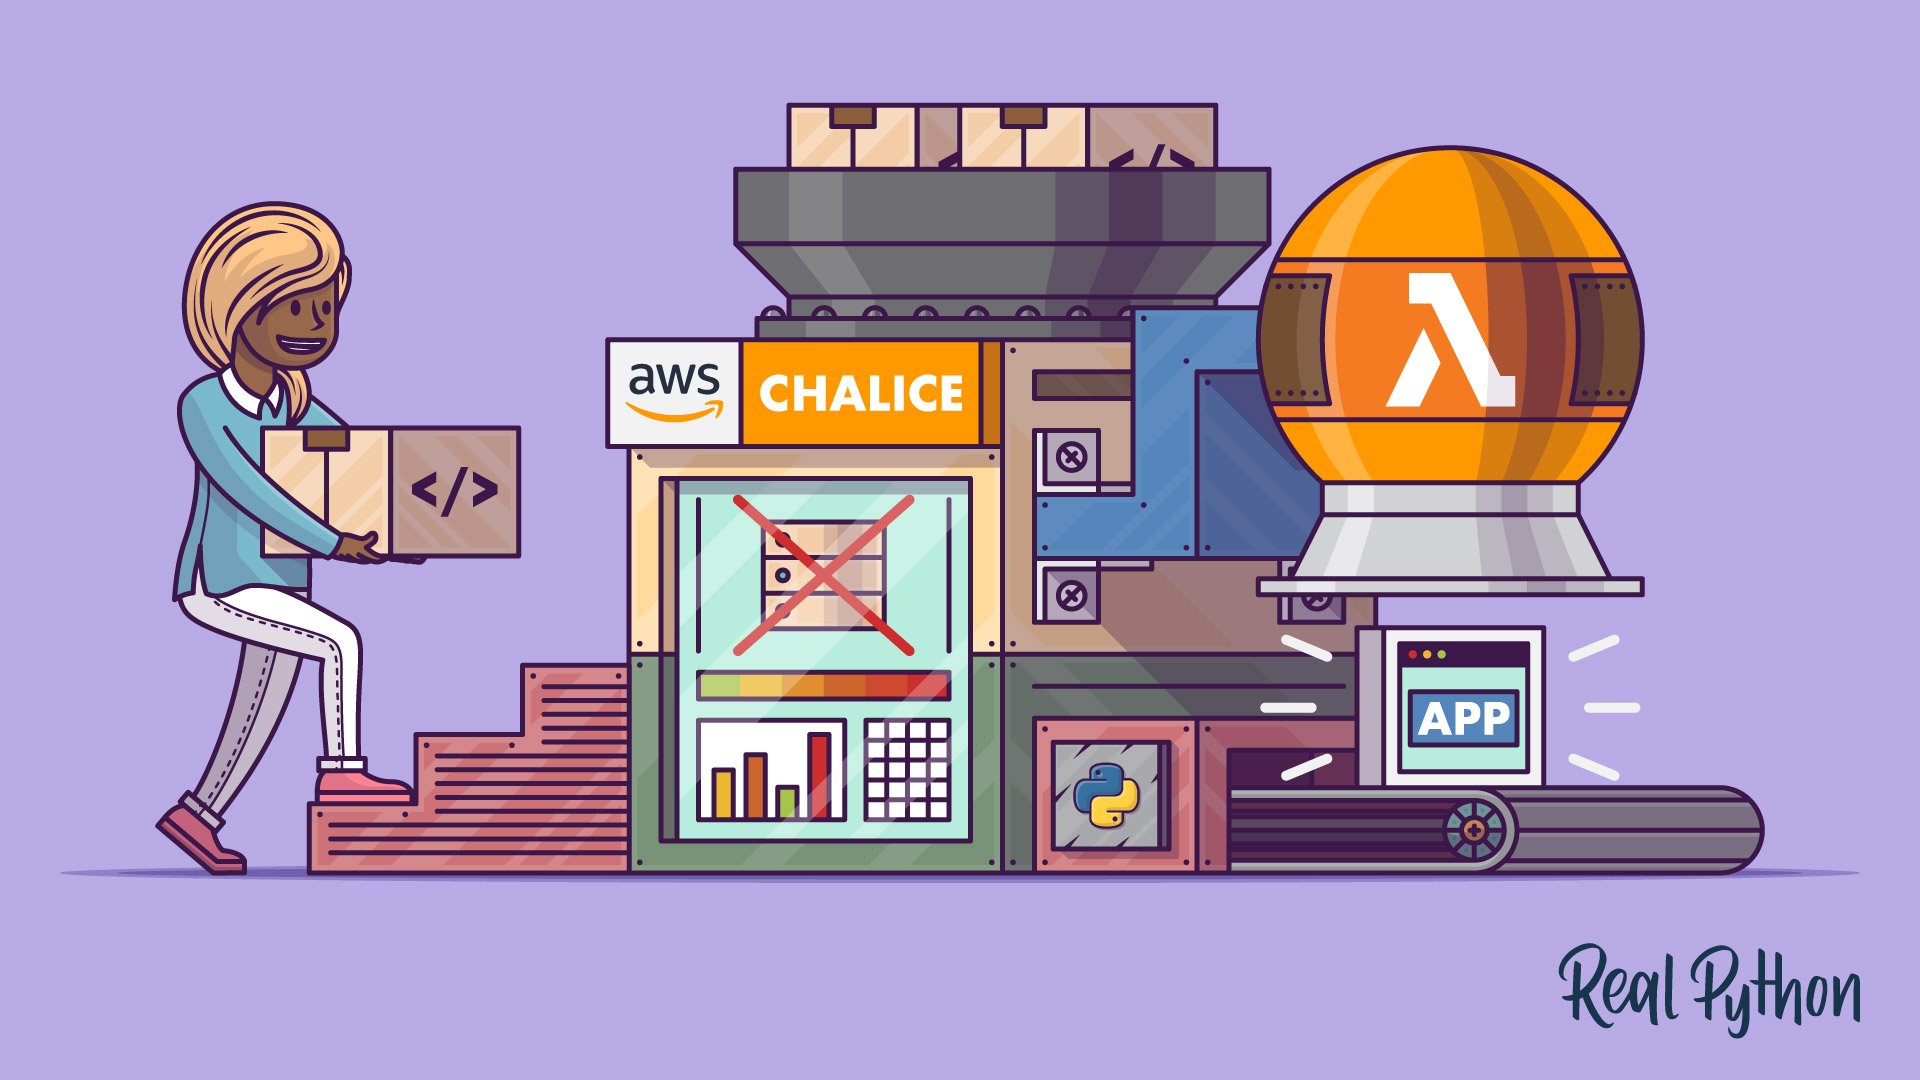 Building Serverless Apps Using AWS Chalice